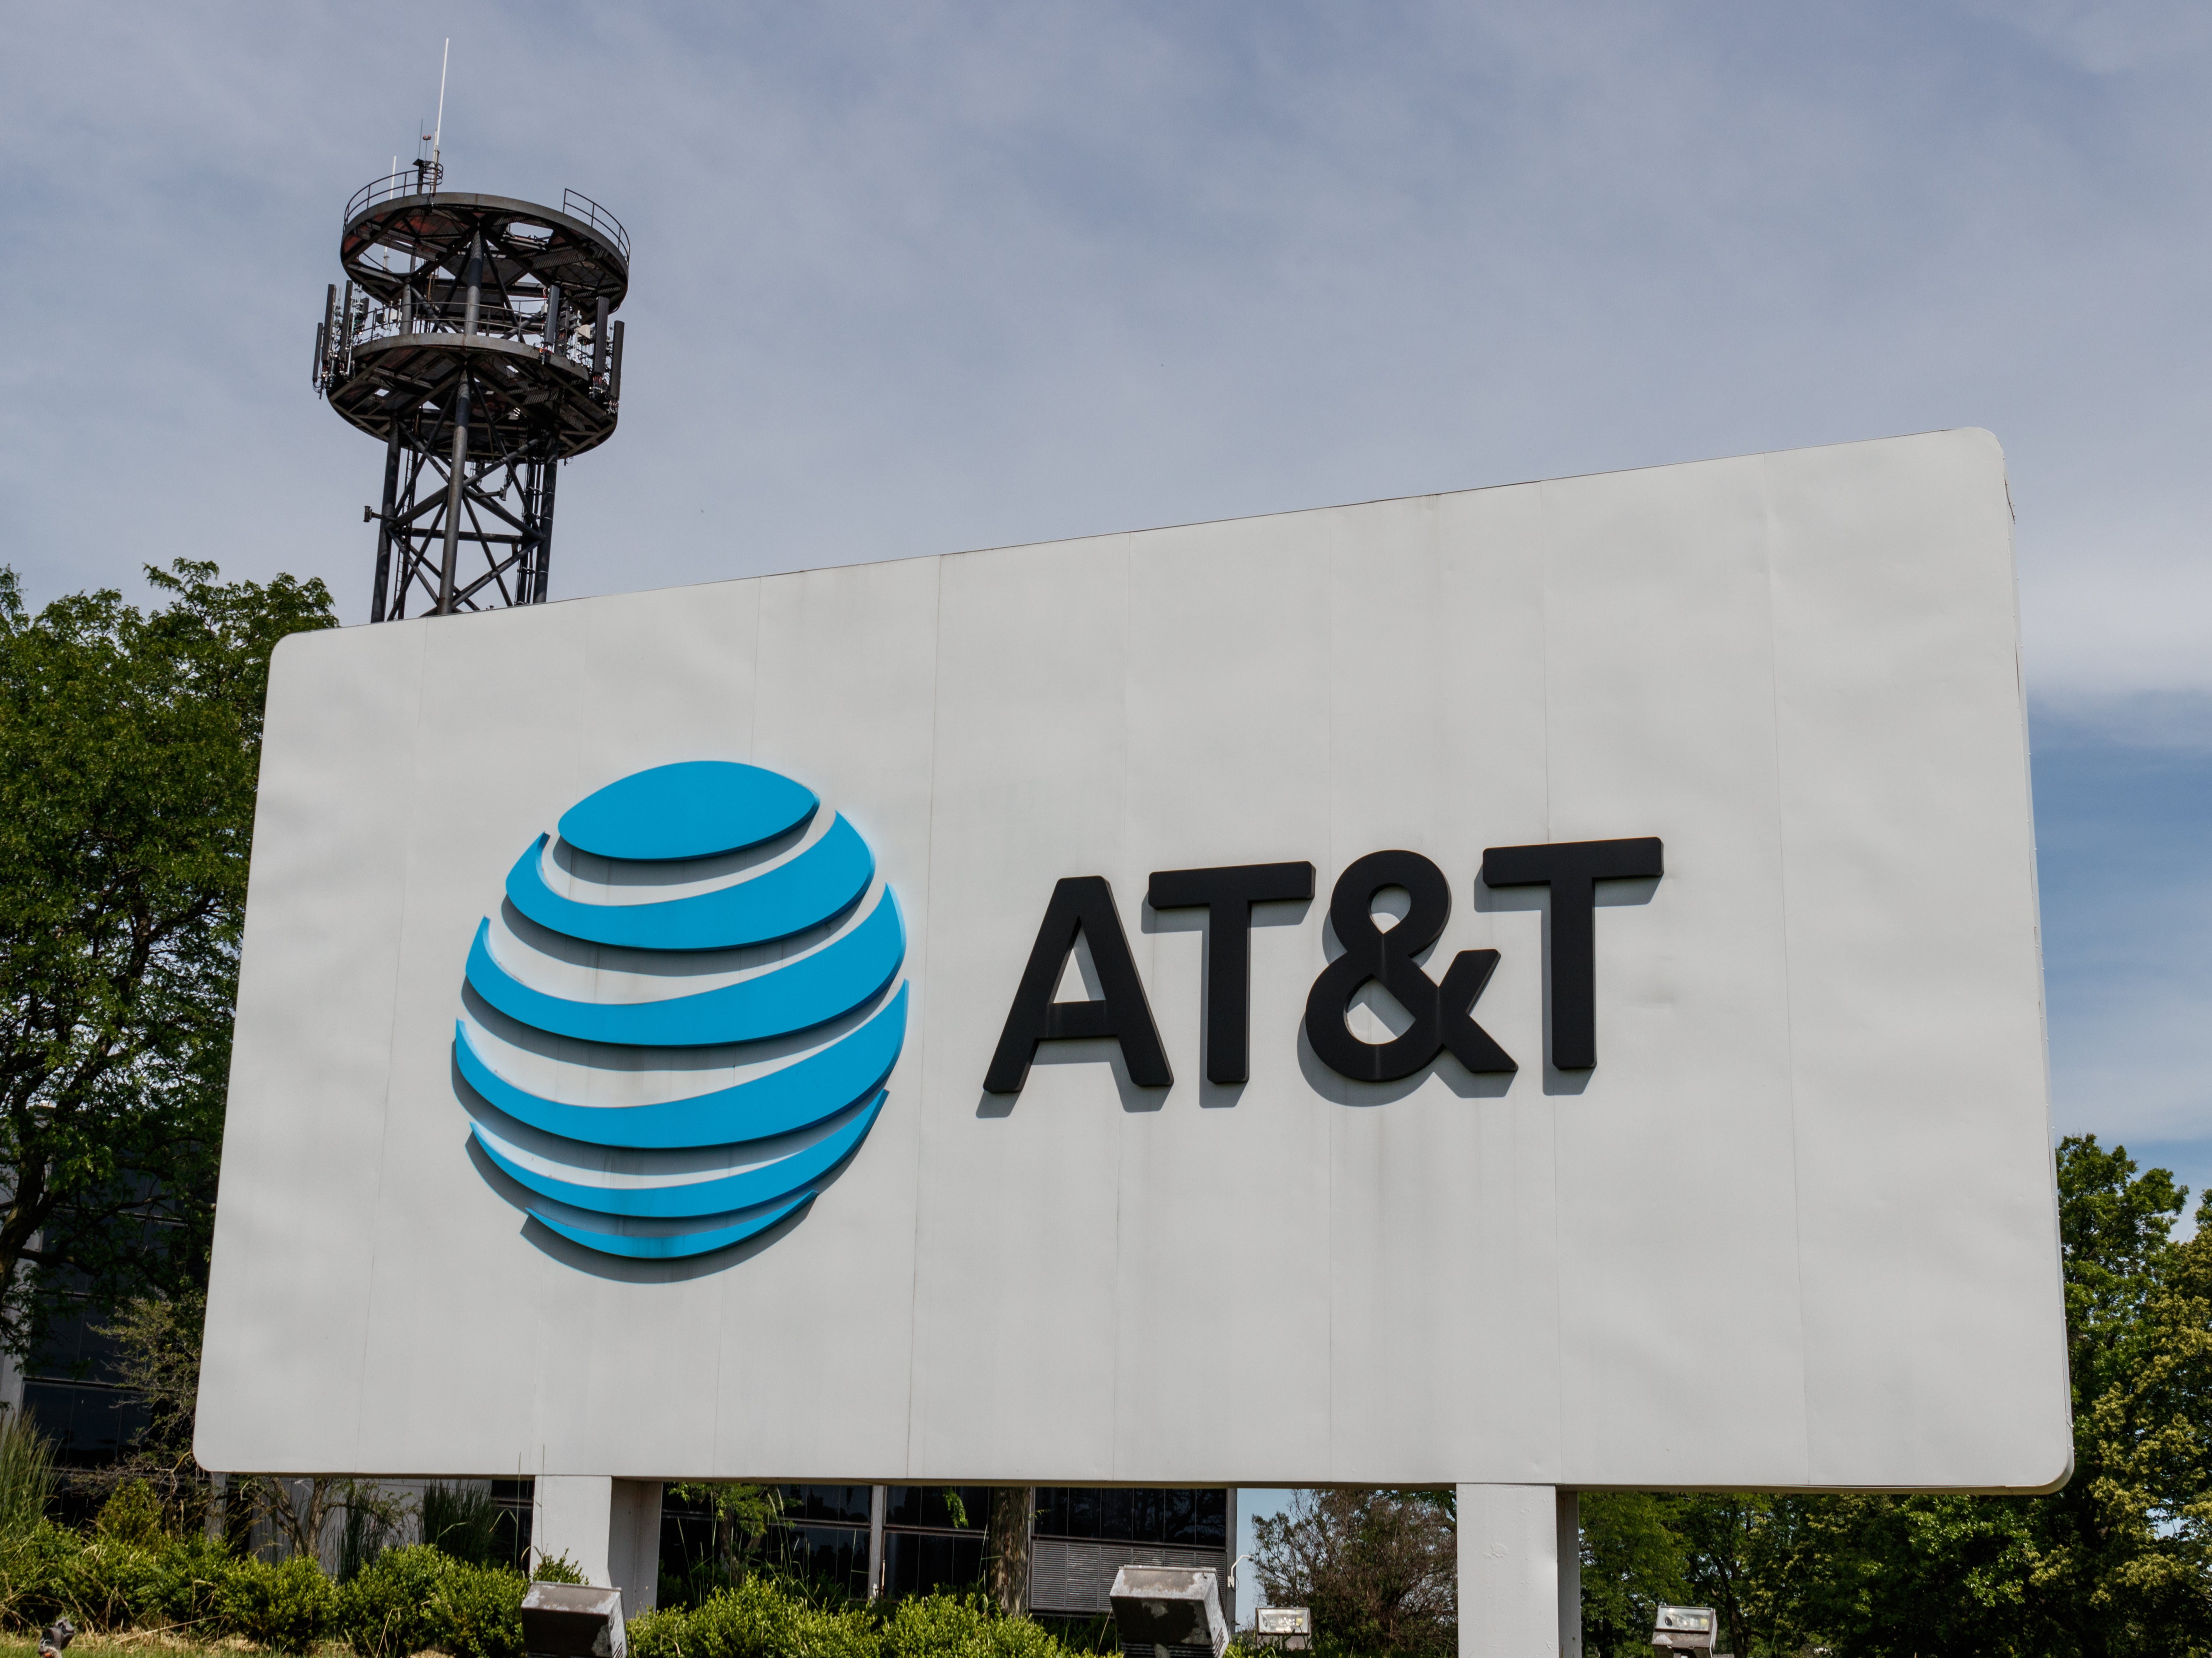 90-year-old man spends $10,000 on ads to complain about internet speeds to AT&T CEO